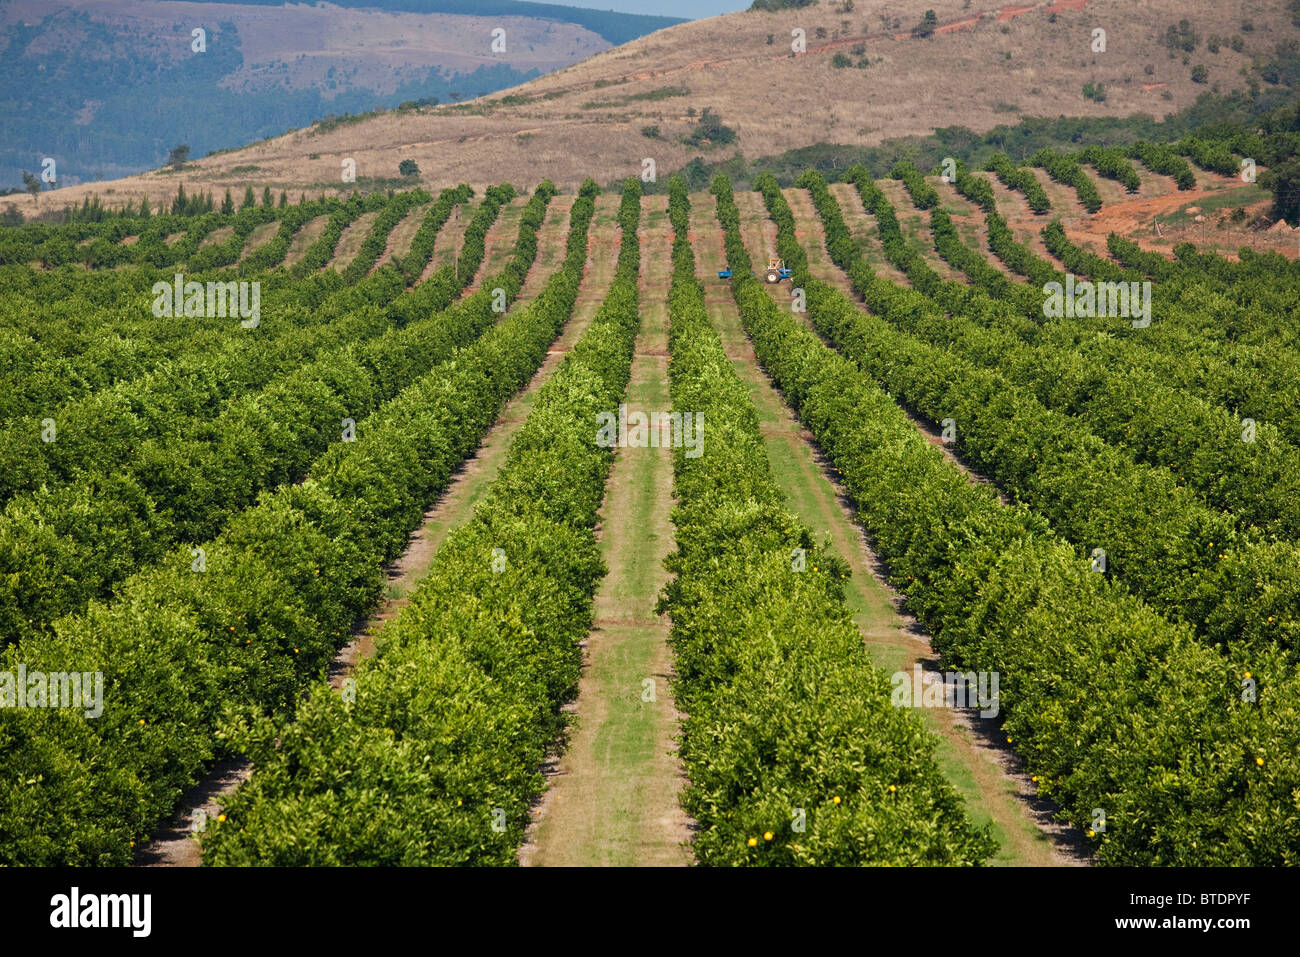 Rows of trees in a Citrus orchard Stock Photo